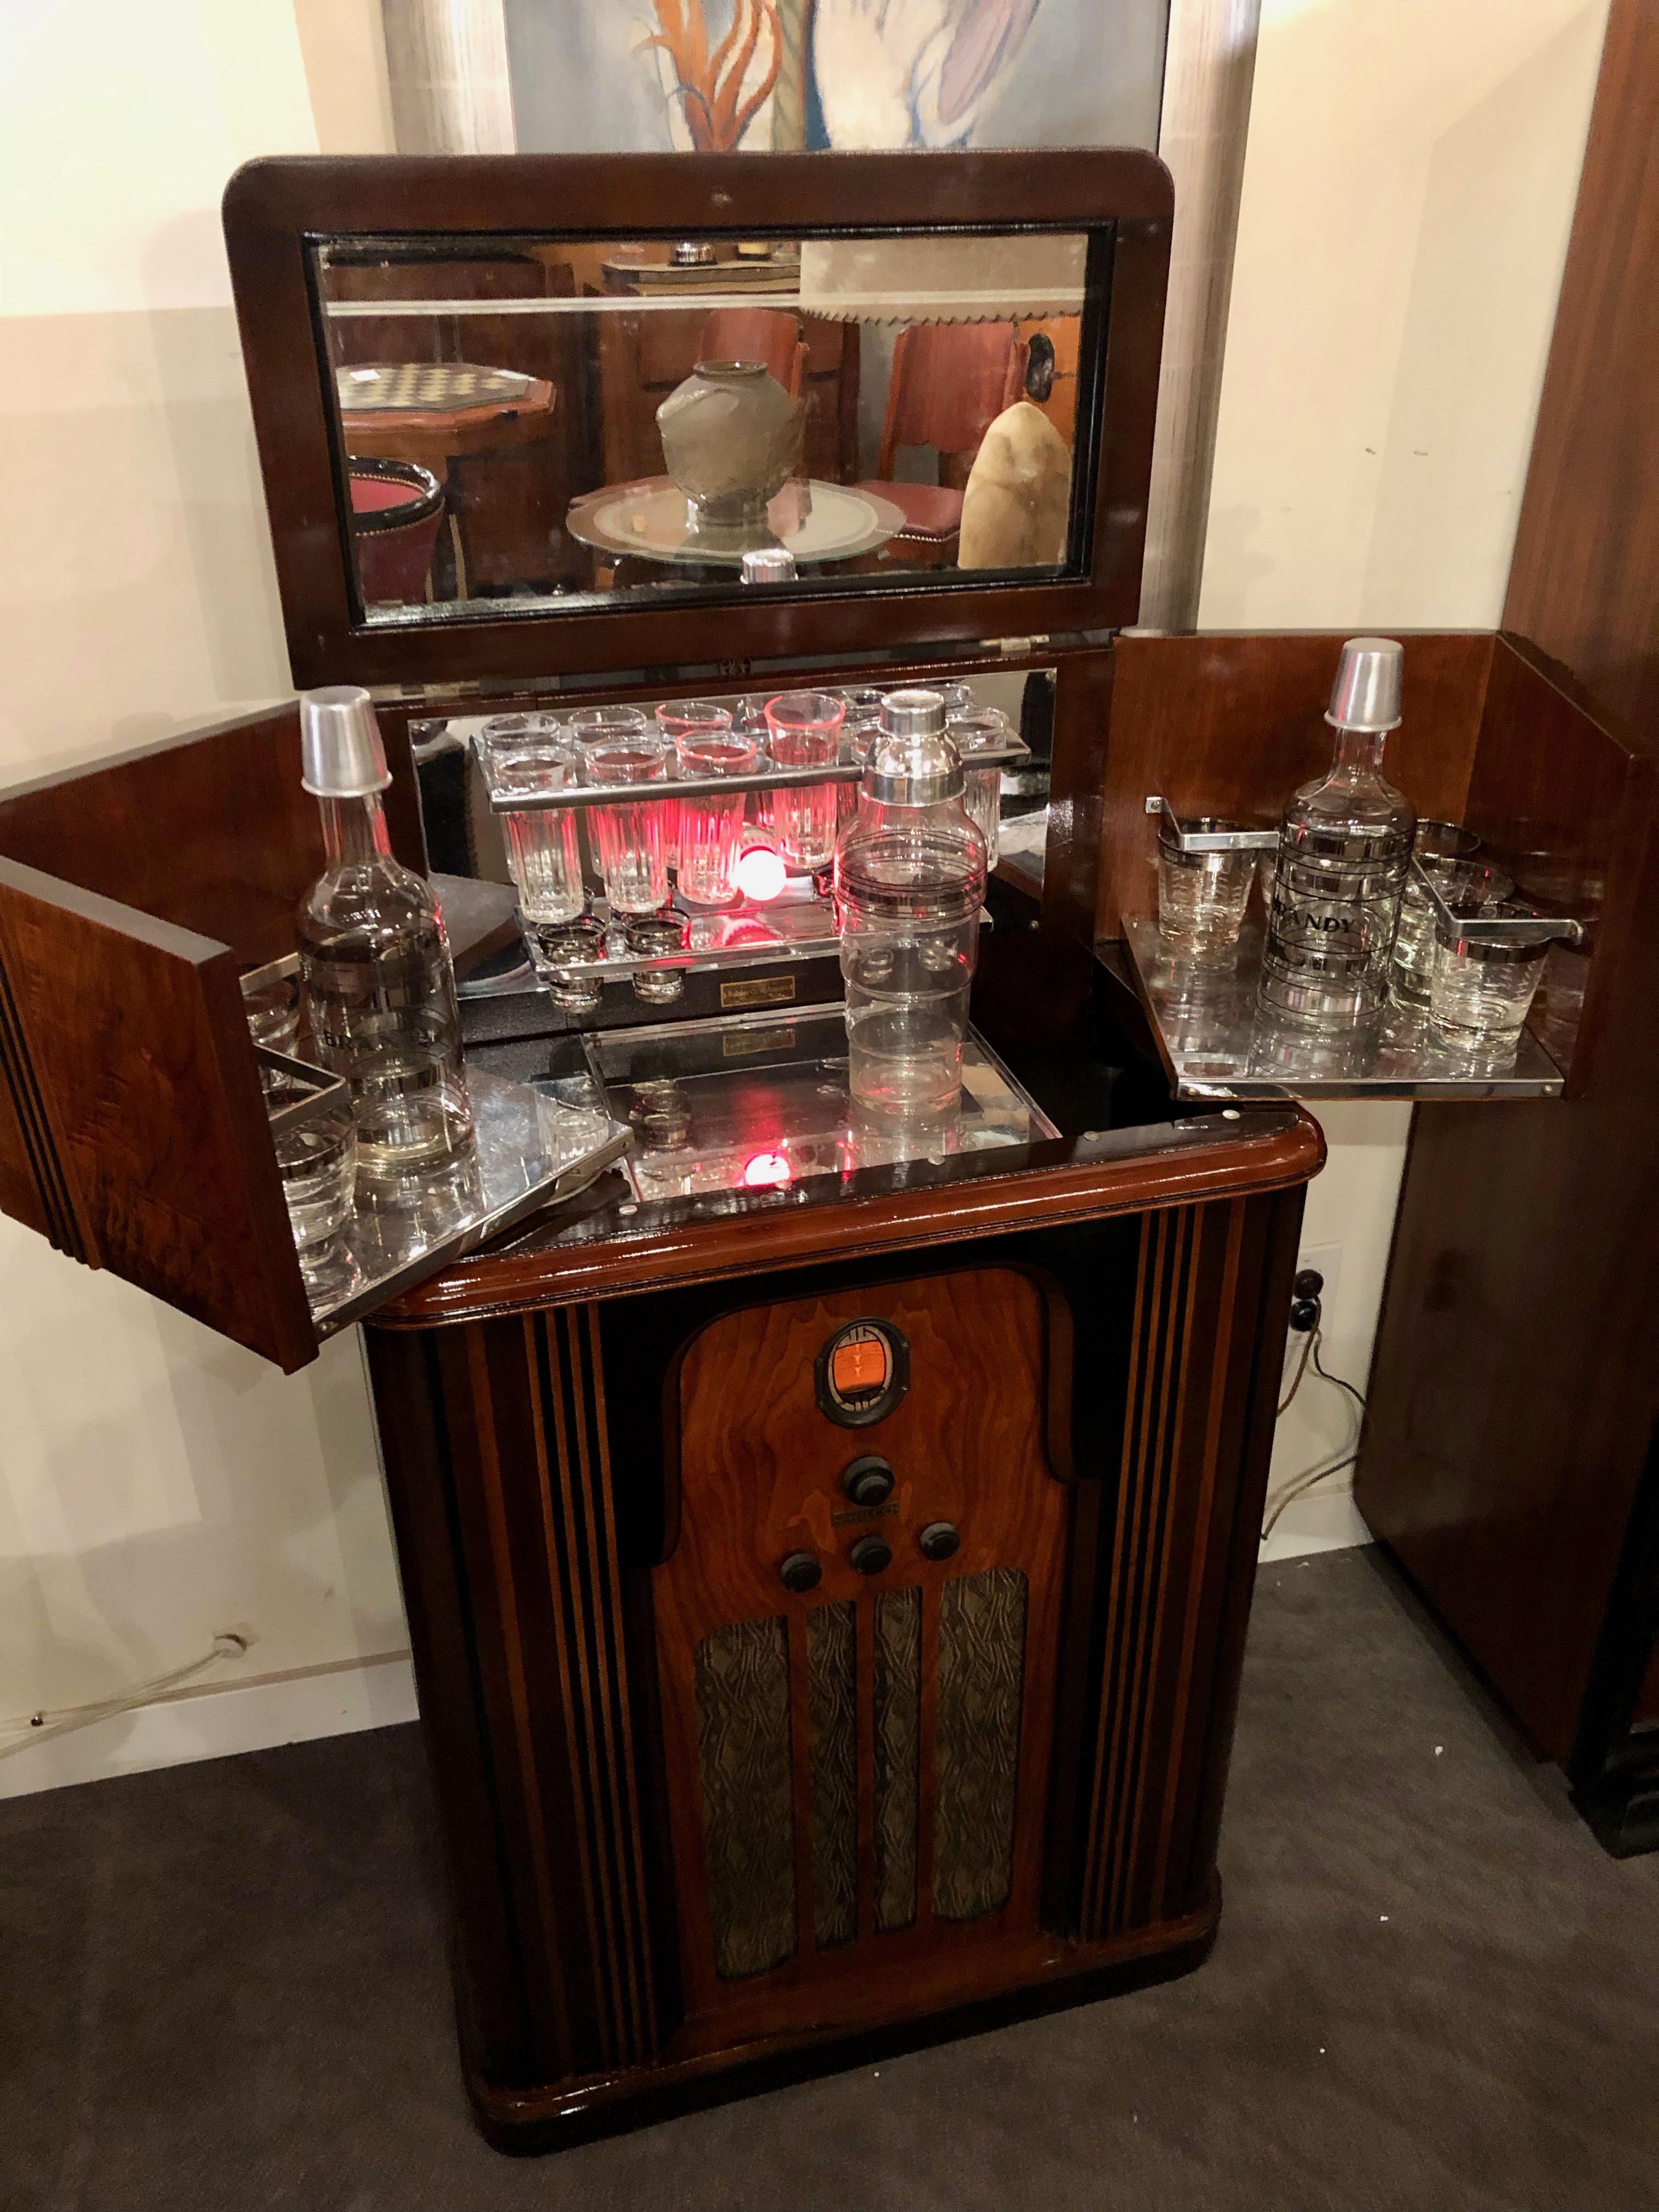 This spectacular Art Deco Philco Radio Bar is one of the most highly sought after pieces by radio and bar enthusiasts alike. Created originally during the Prohibition Era – a time of fascination with hidden and secret liquor bars, it reached a high